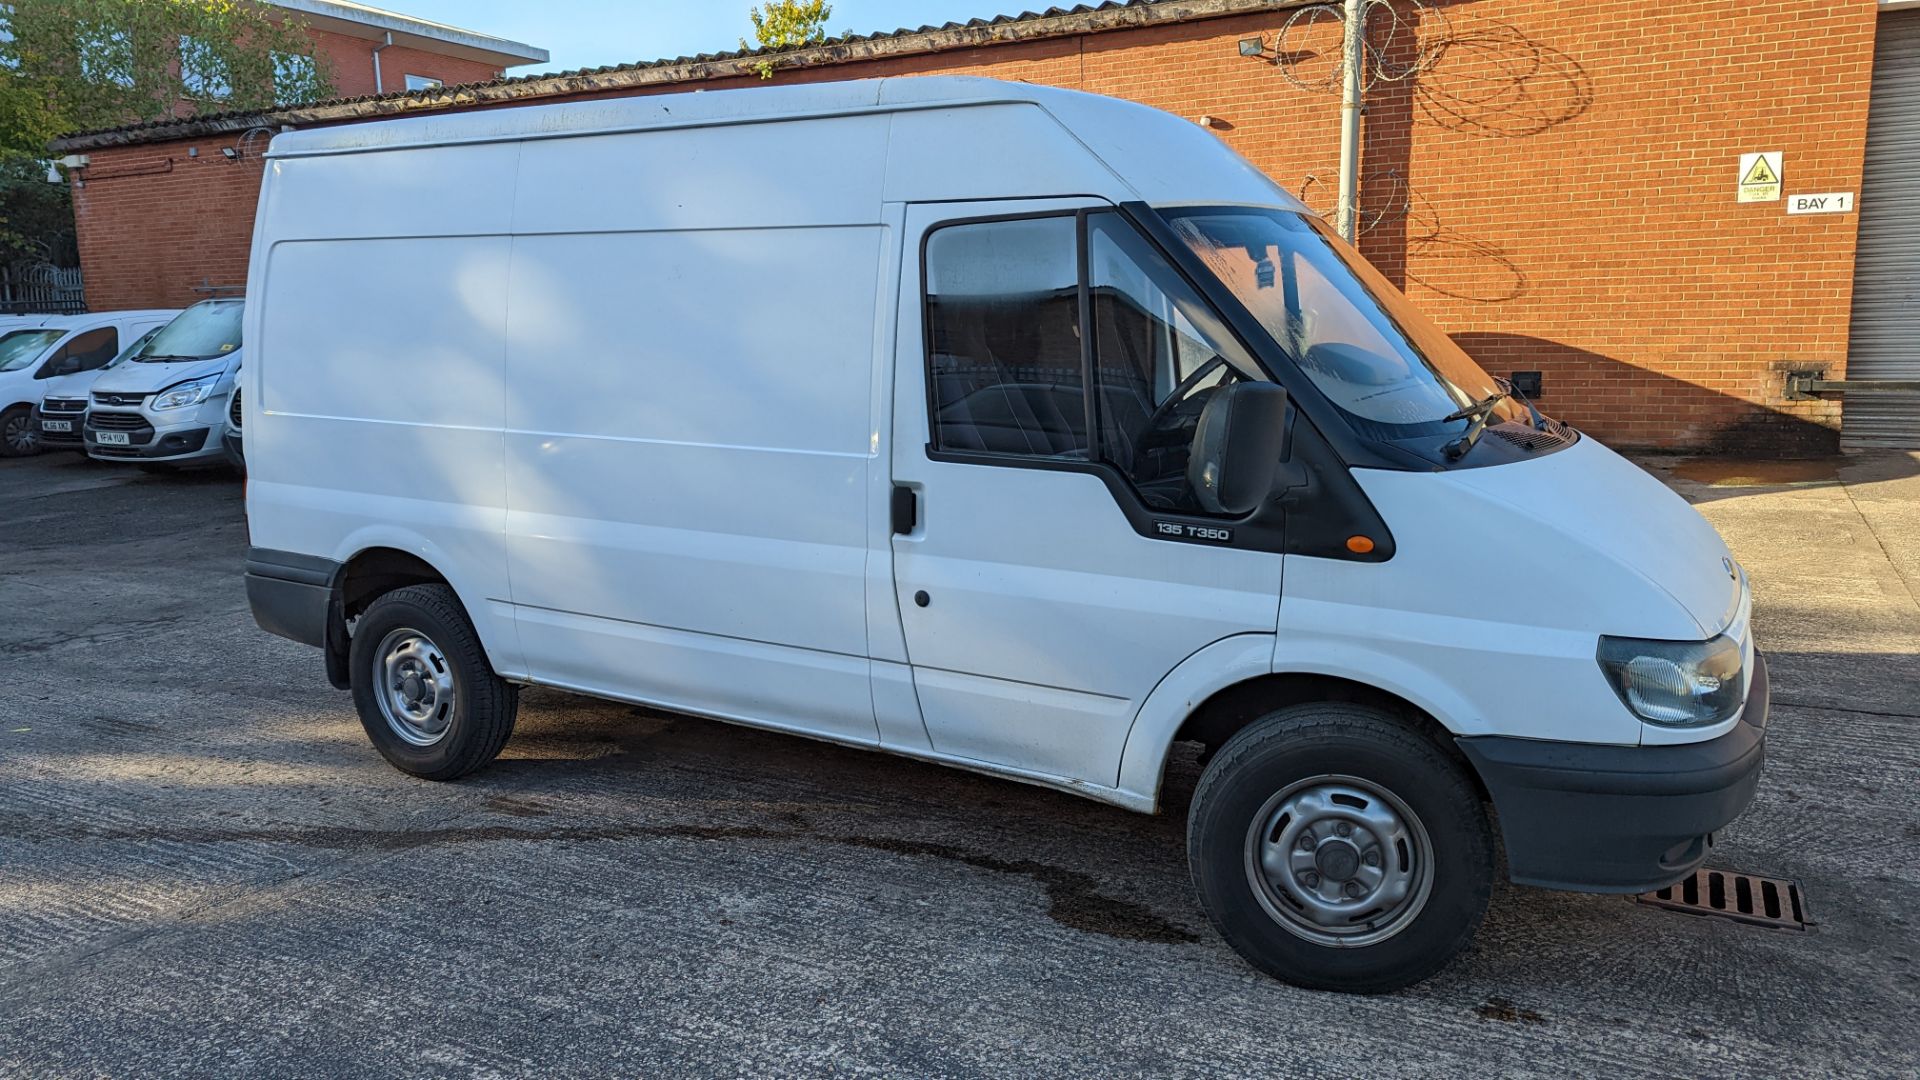 CU06 FBC Ford Transit panel van, 6 speed manual gearbox, 2402cc diesel engine. Colour: white. Fir - Image 4 of 44